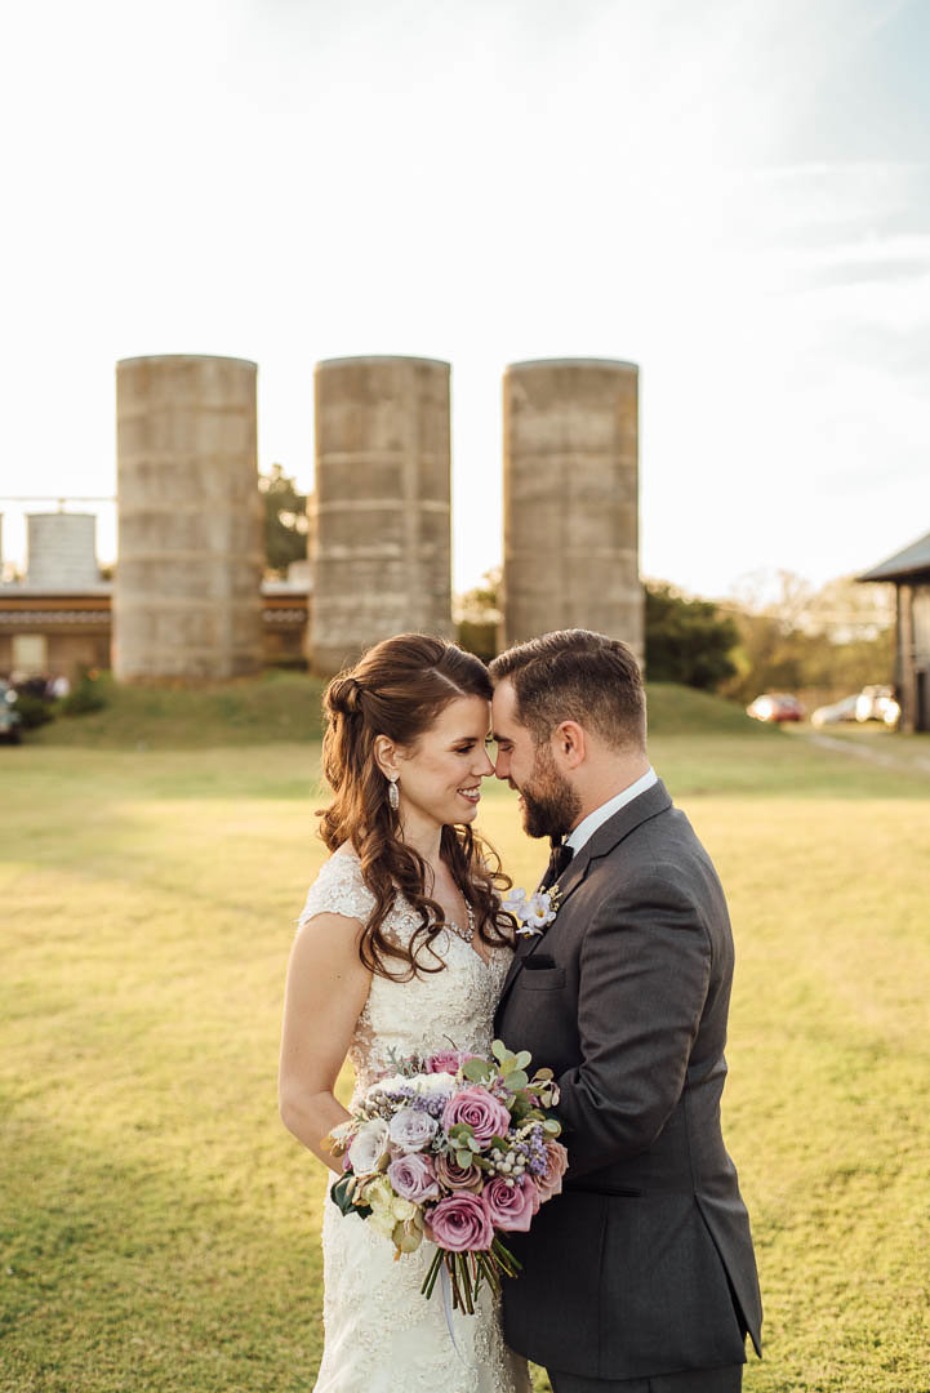 Green and purple fall outdoor wedding amongst the silos